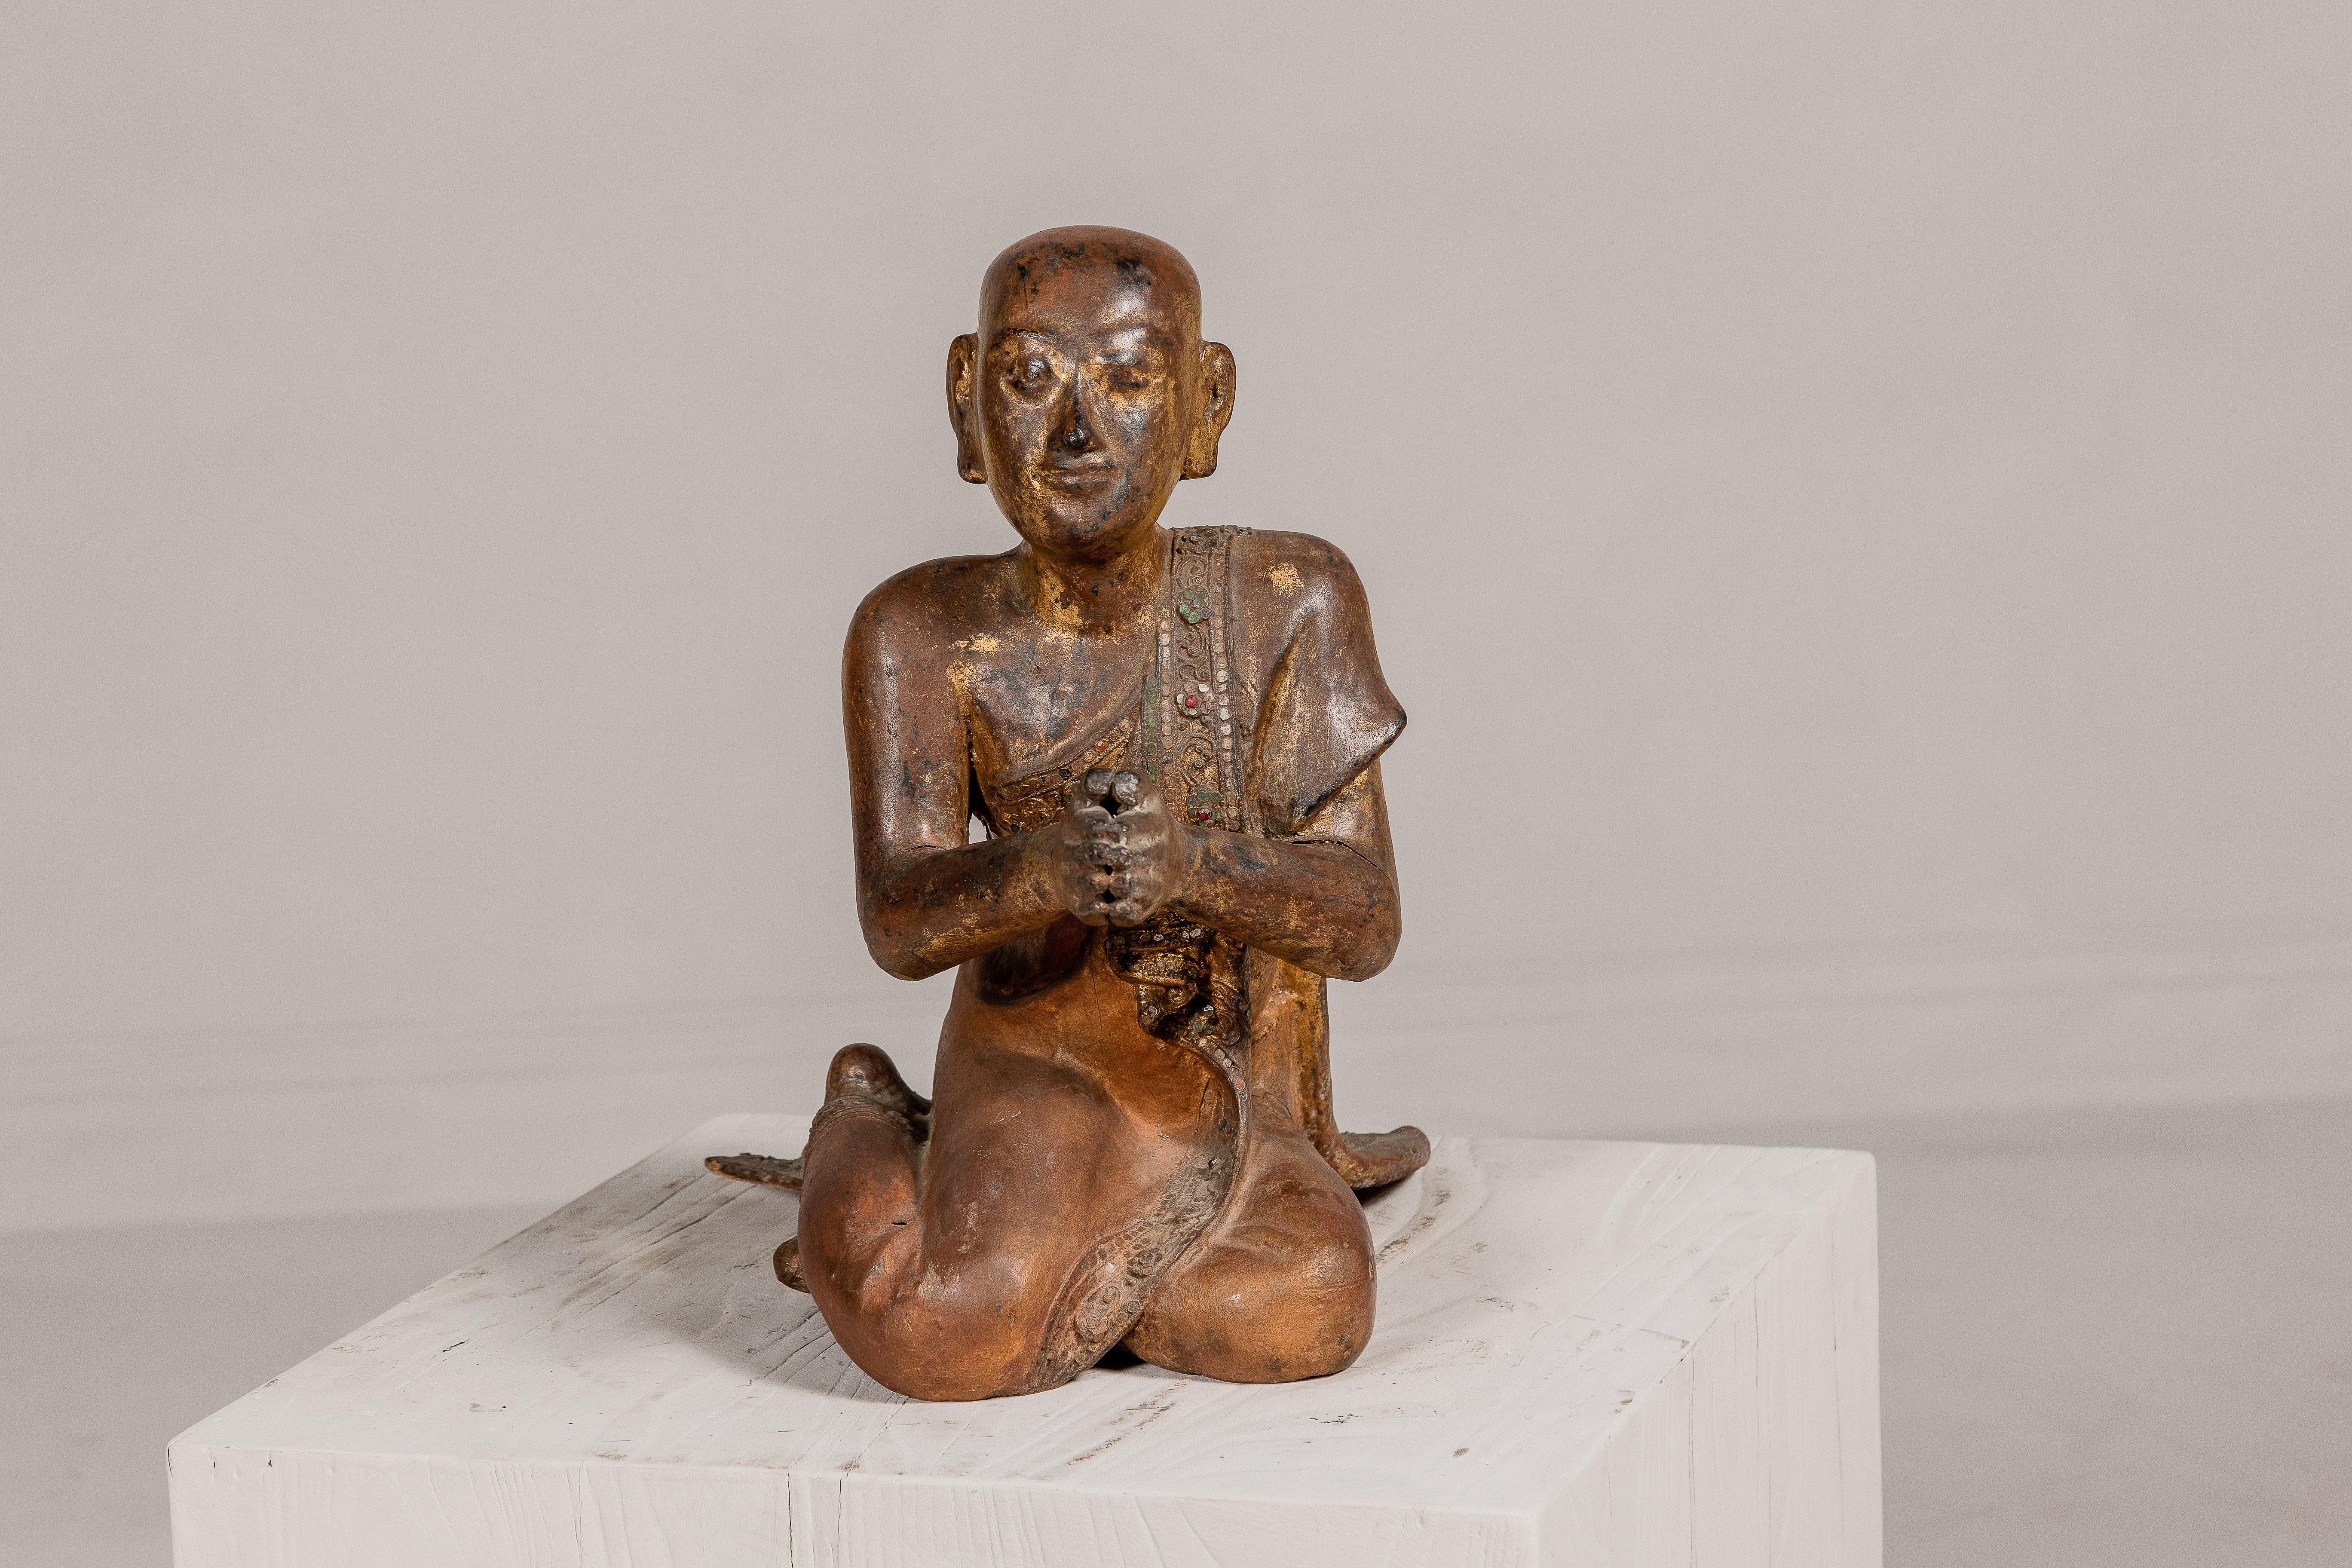 A Thai religious hand carved wooden statue of a seated Buddhist monk with polychrome and gilded accents from the early 20th century. This early 20th-century Thai statue, masterfully hand-carved, captures the tranquil essence of a seated Buddhist